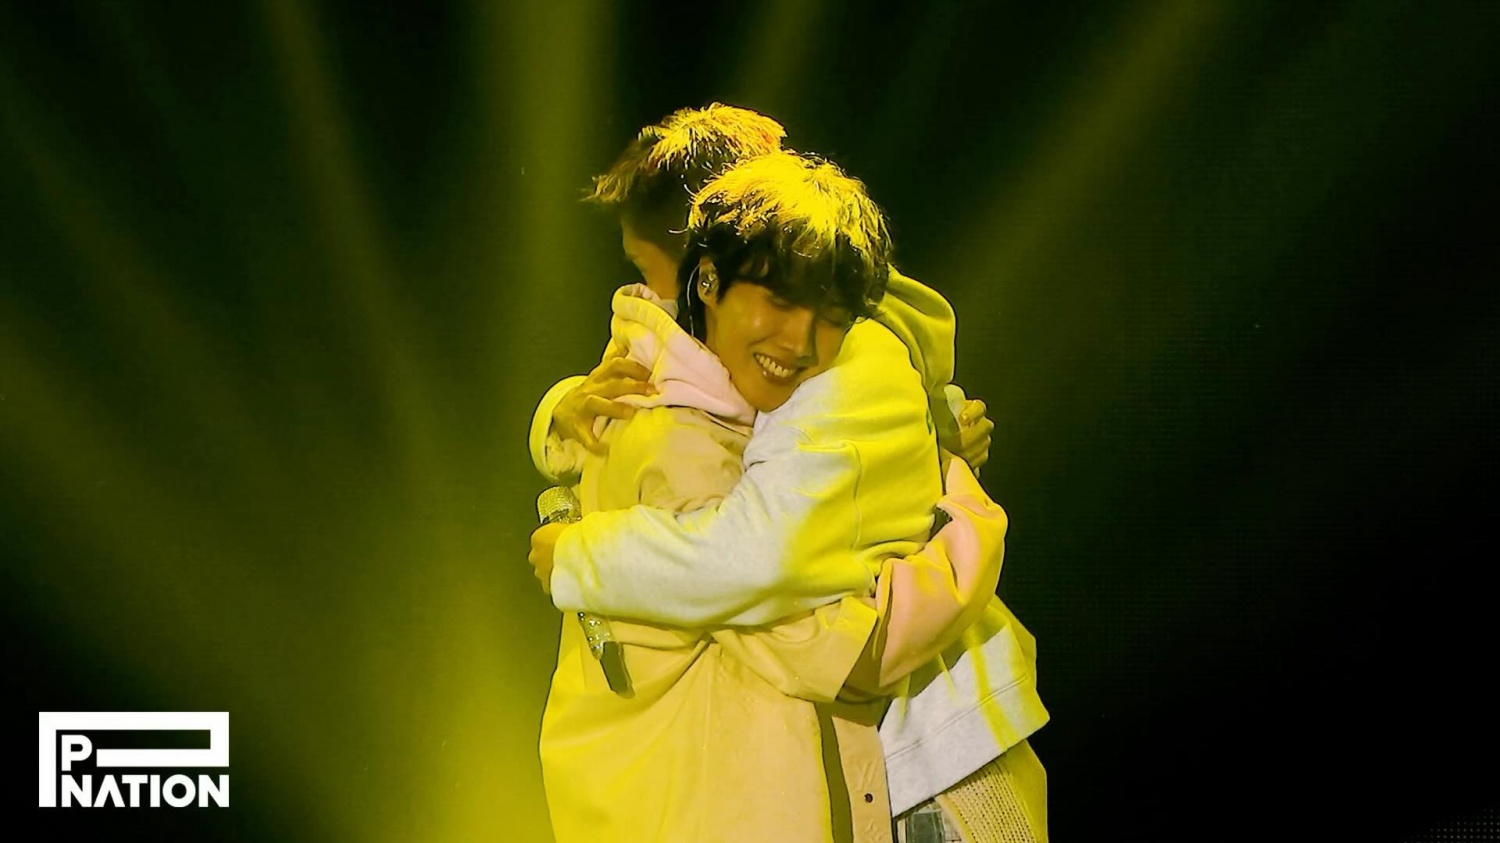 Crush Releases Concert Clips… A deep hug with J-Hope